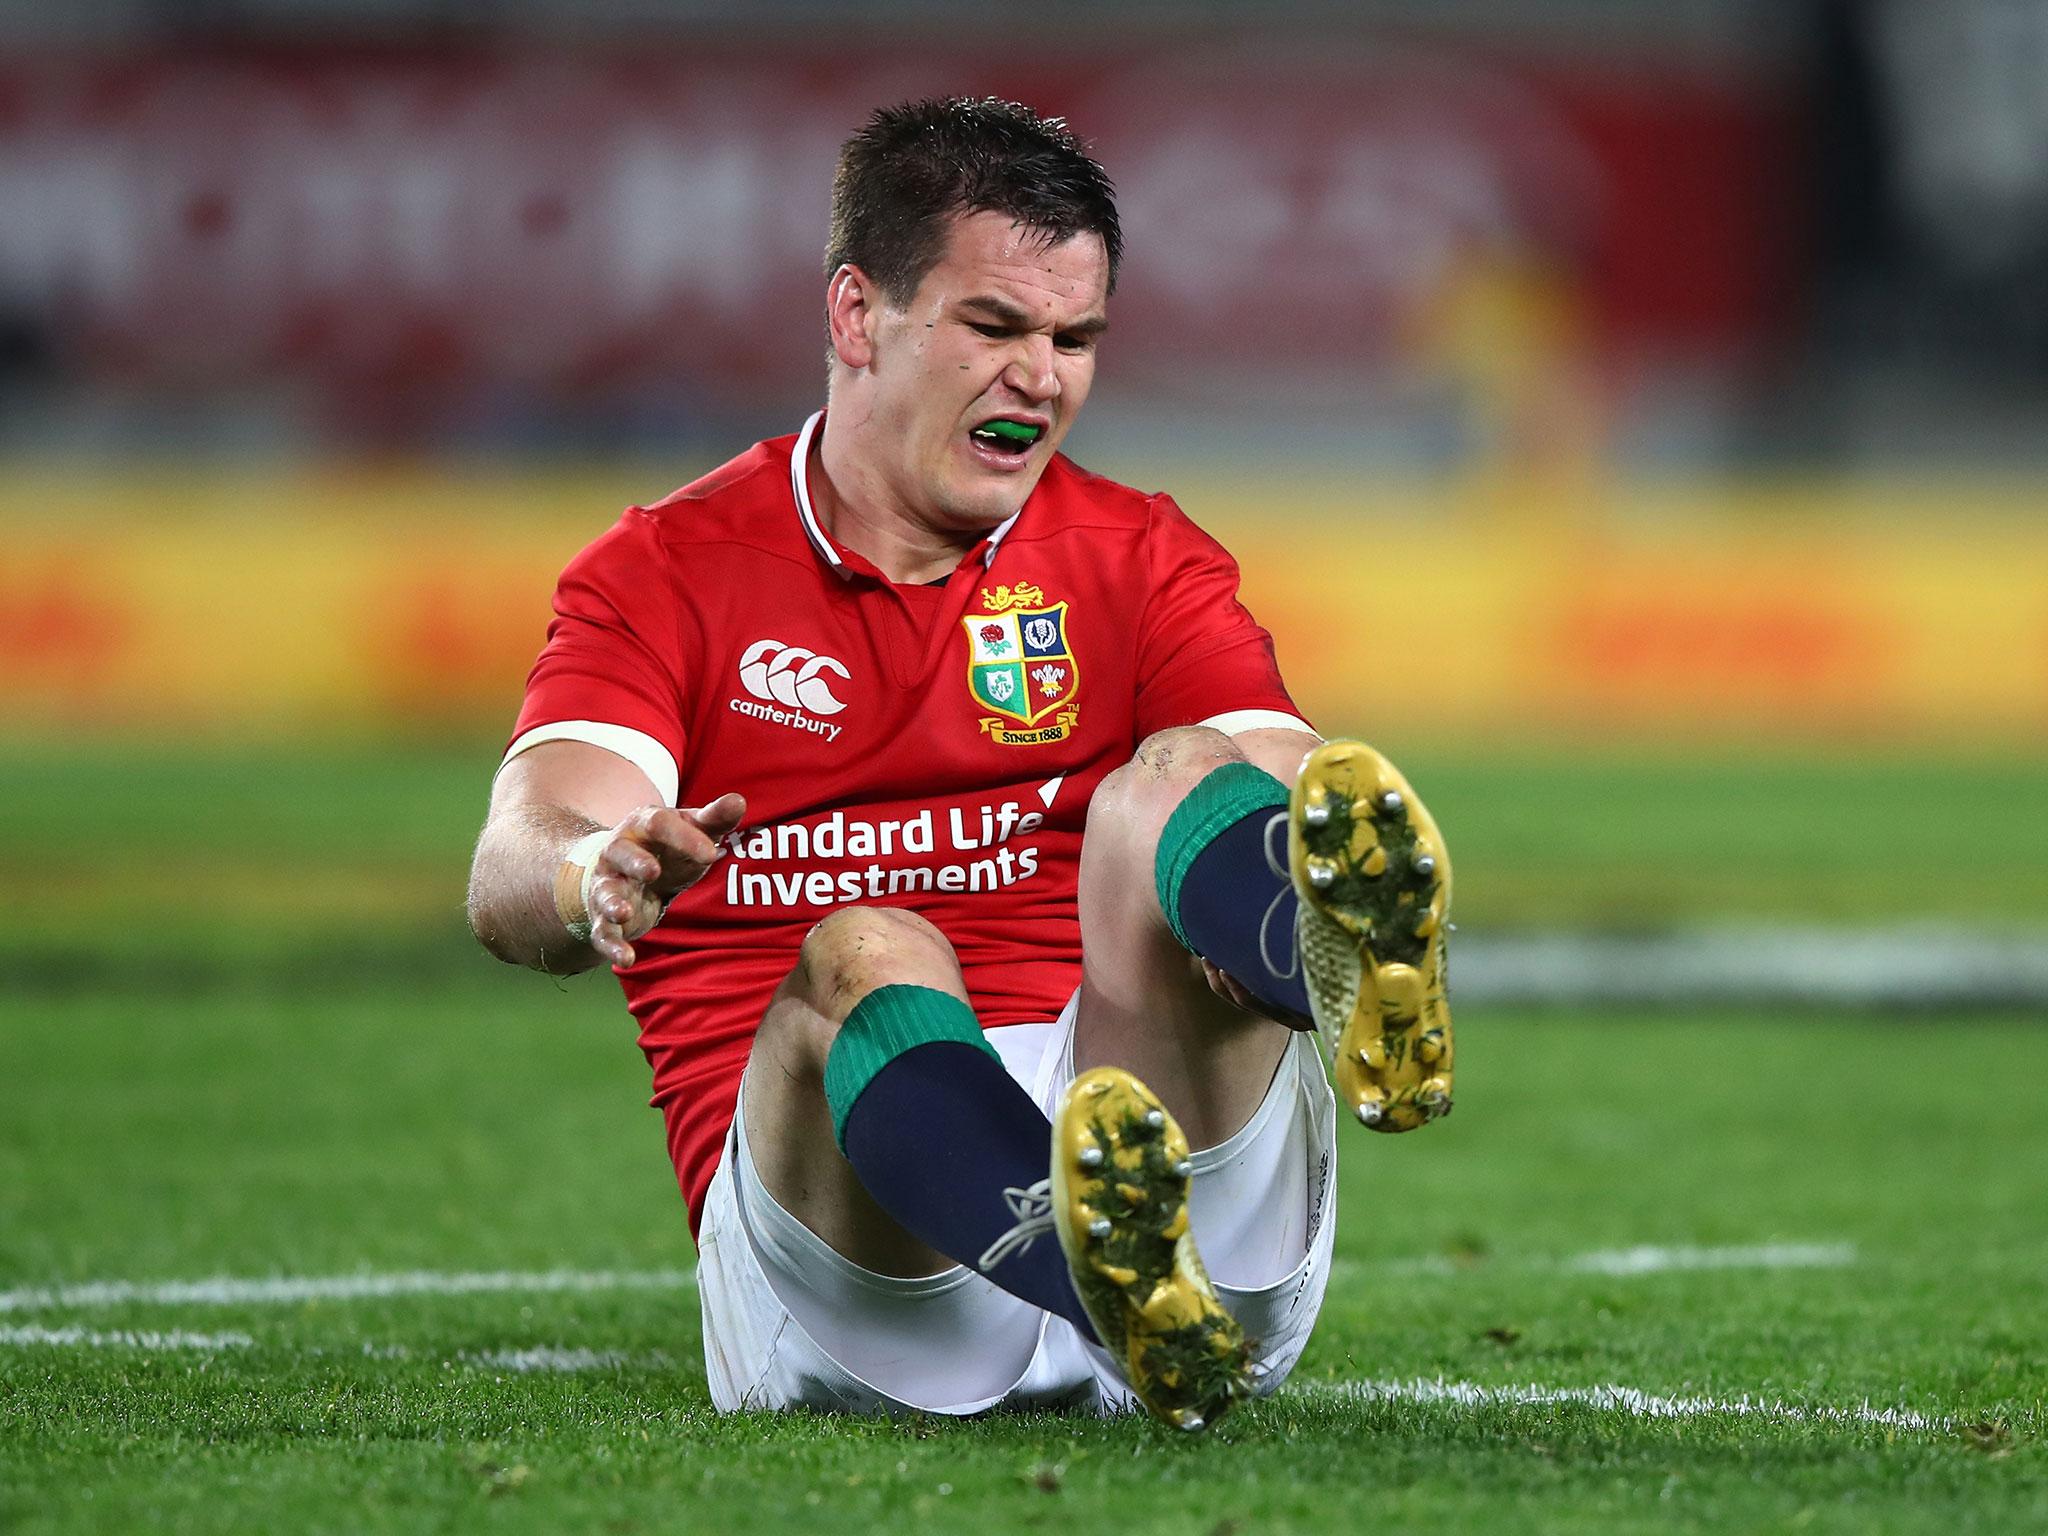 It’s understood that the player’s injuries are unlikely to hinder his pre-season preparations with Leinster